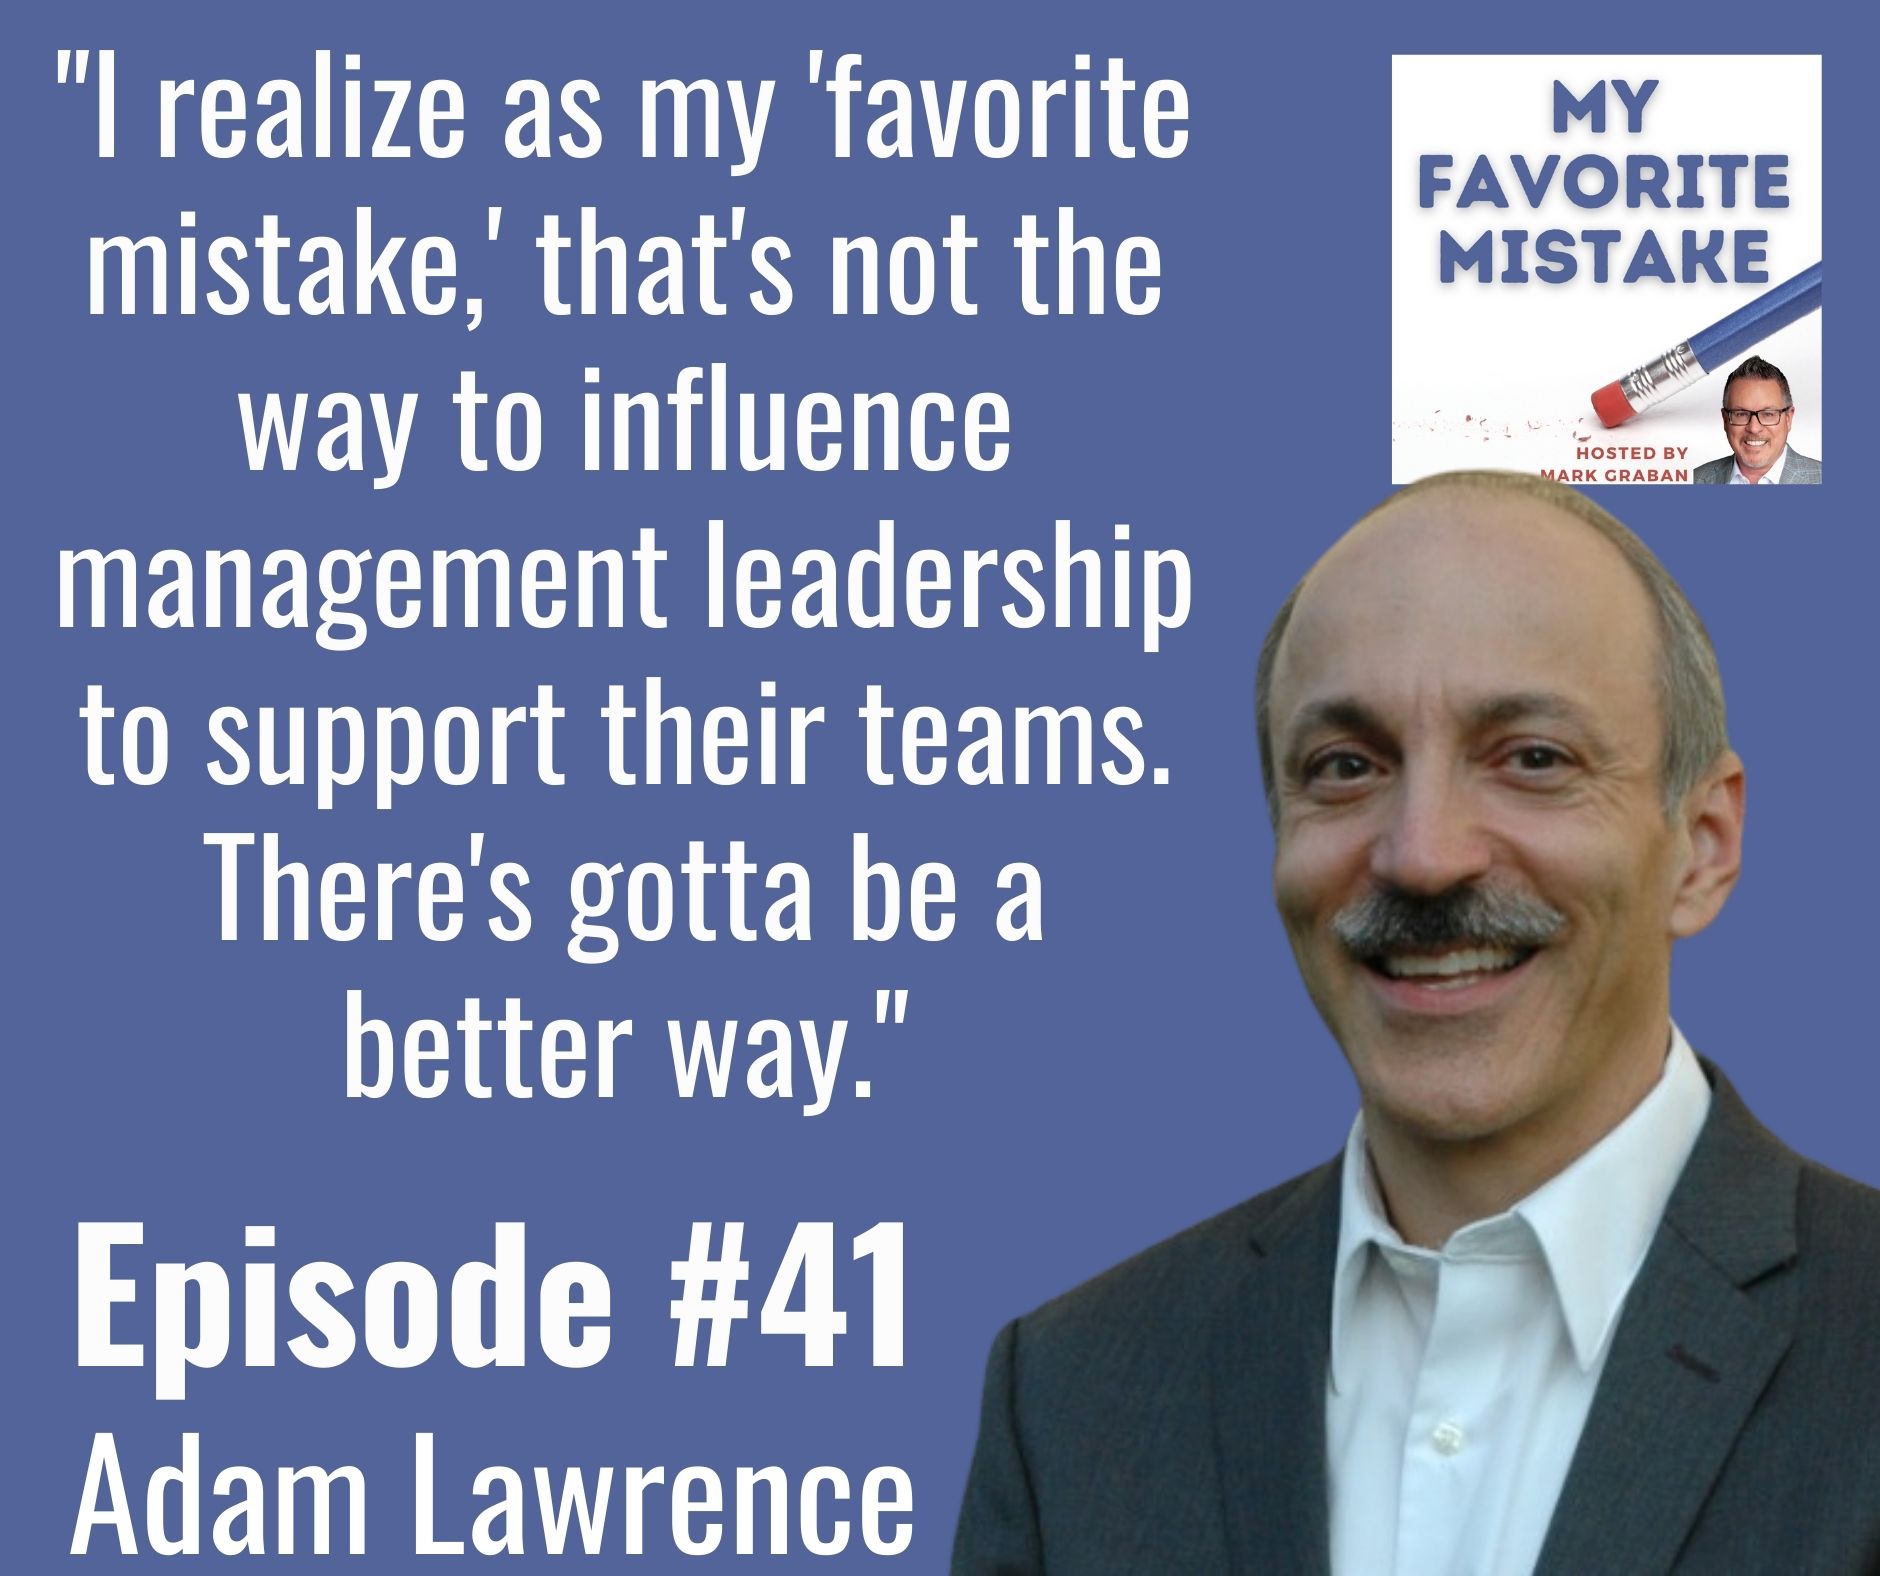 "I realize as my 'favorite mistake,' that's not the way to influence management leadership to support their teams. There's gotta be a better way."